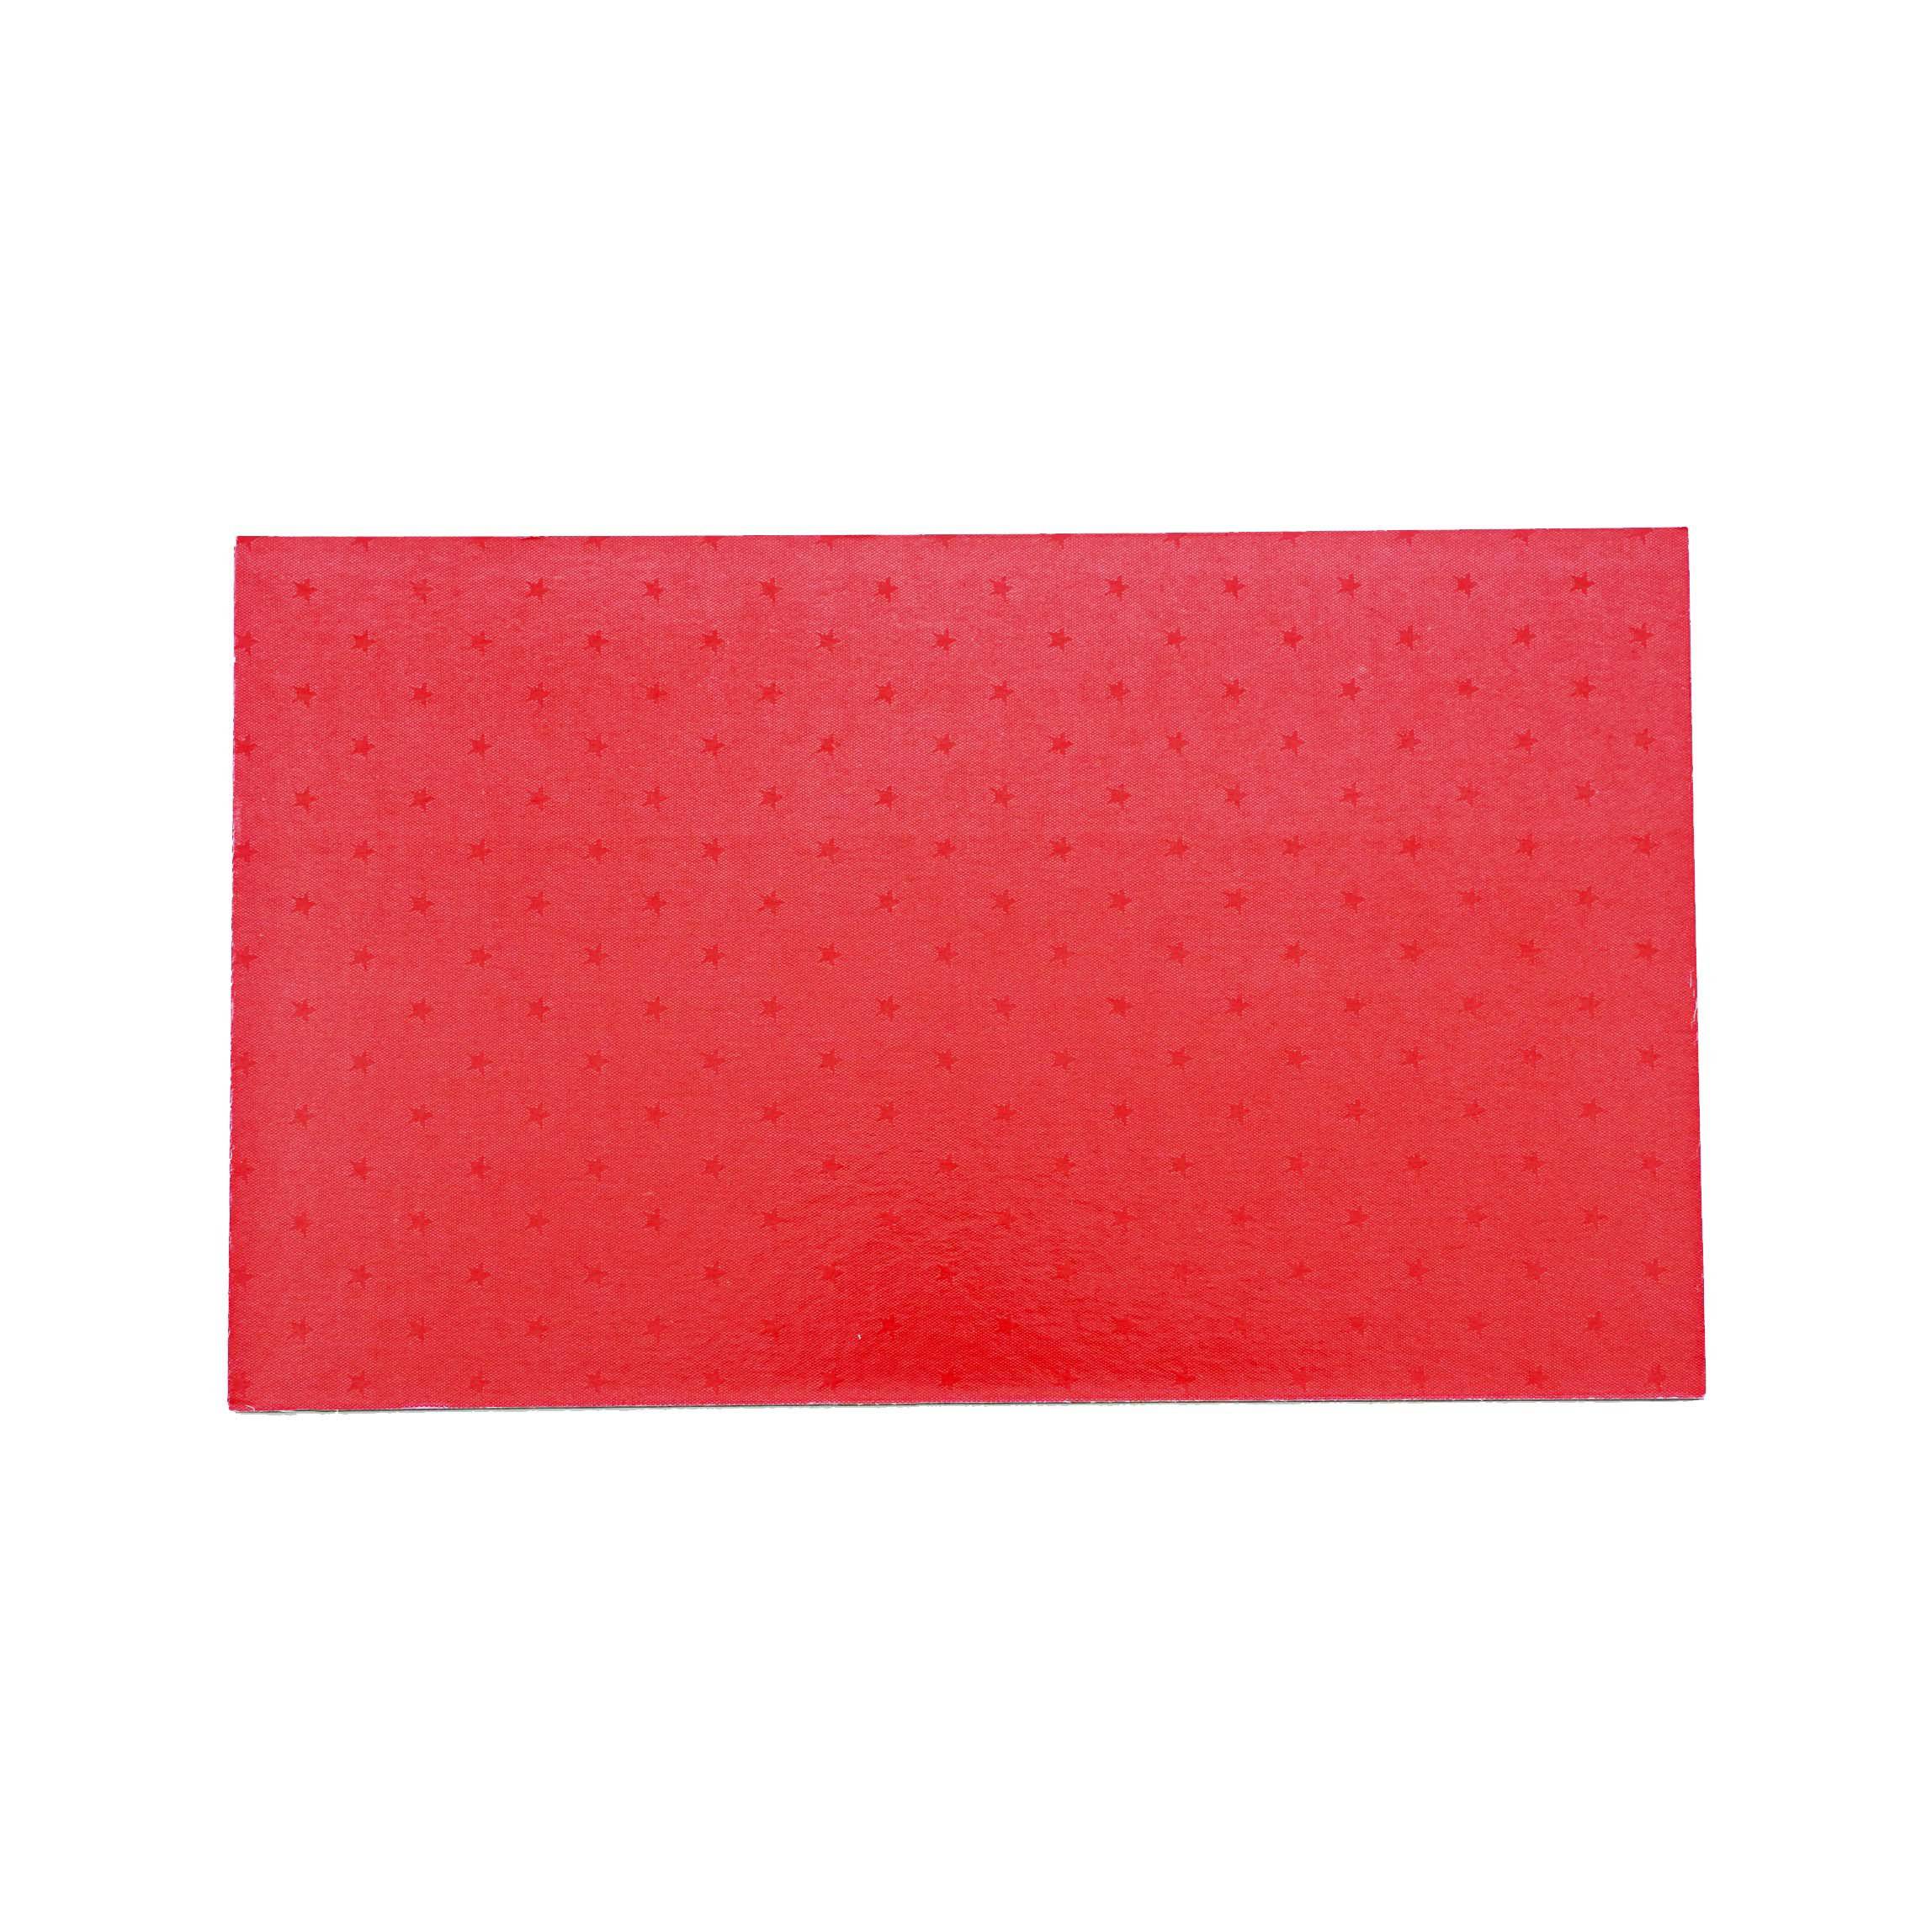 Red Rectangular Cake Board 5 Pieces